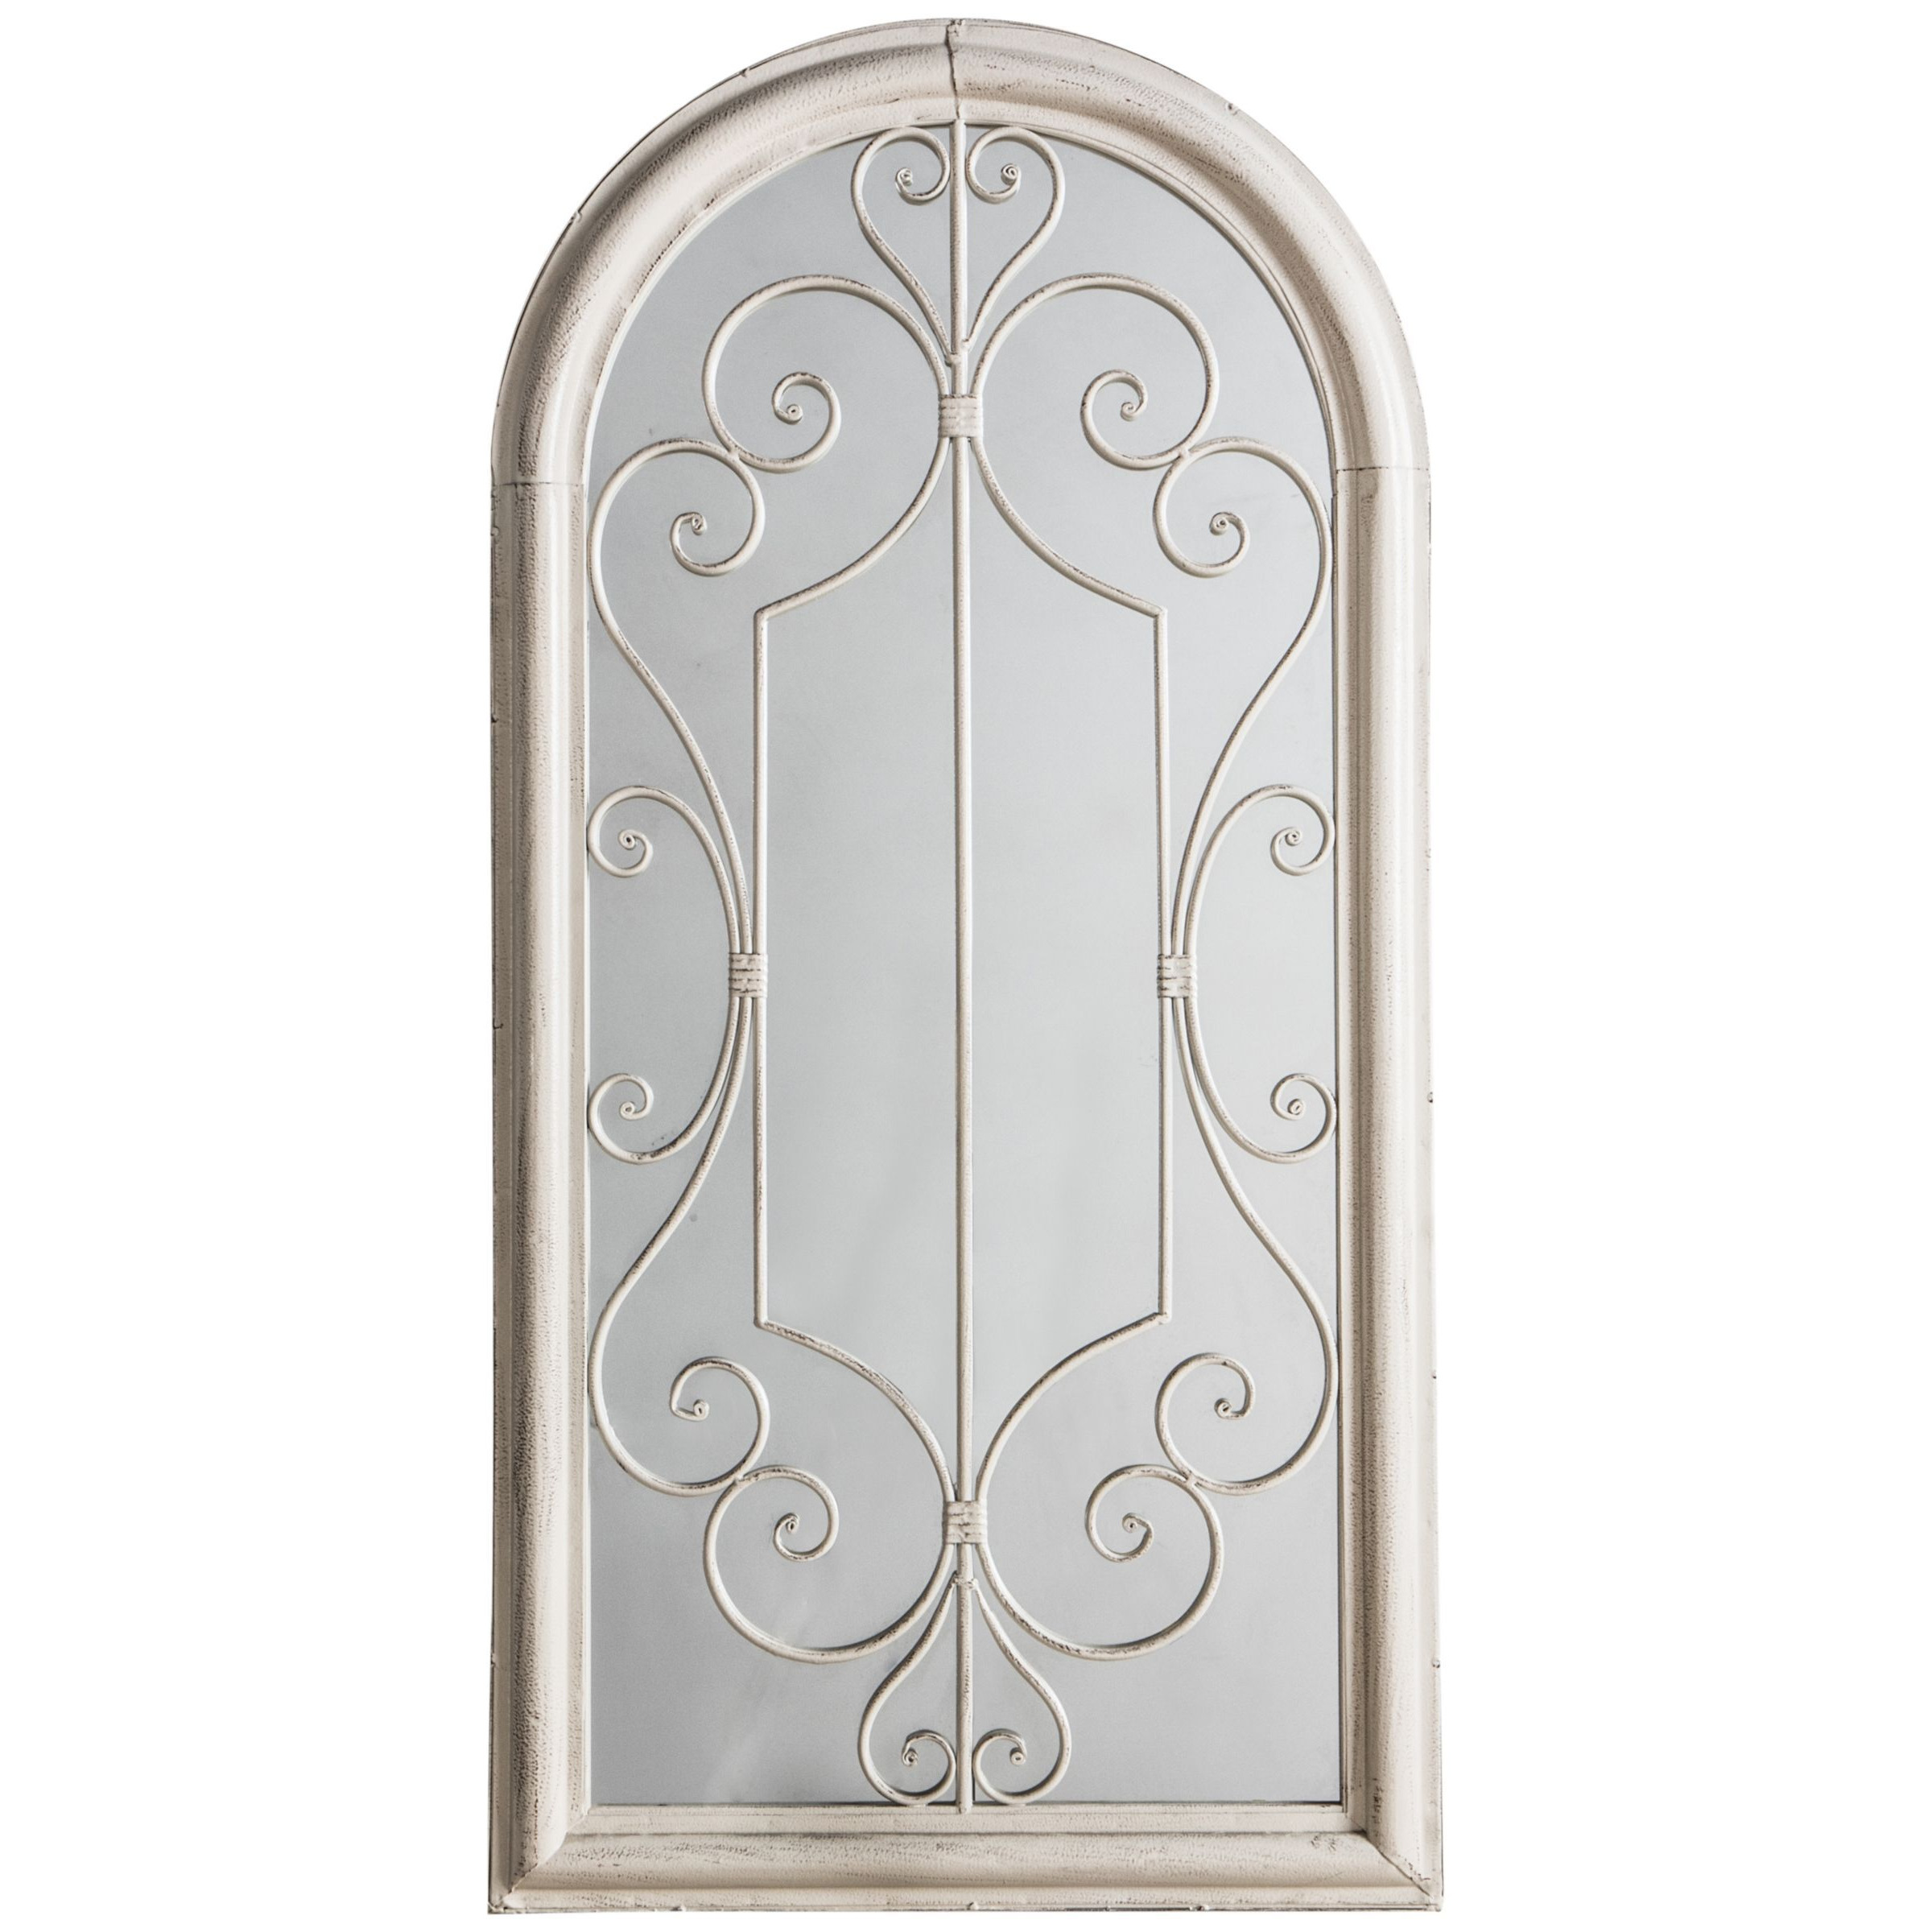 Gallery Direct Fleura Outdoor Garden Wall Ornate Arched Mirror, 96.5 x 49cm, Antique Ivory - image 1